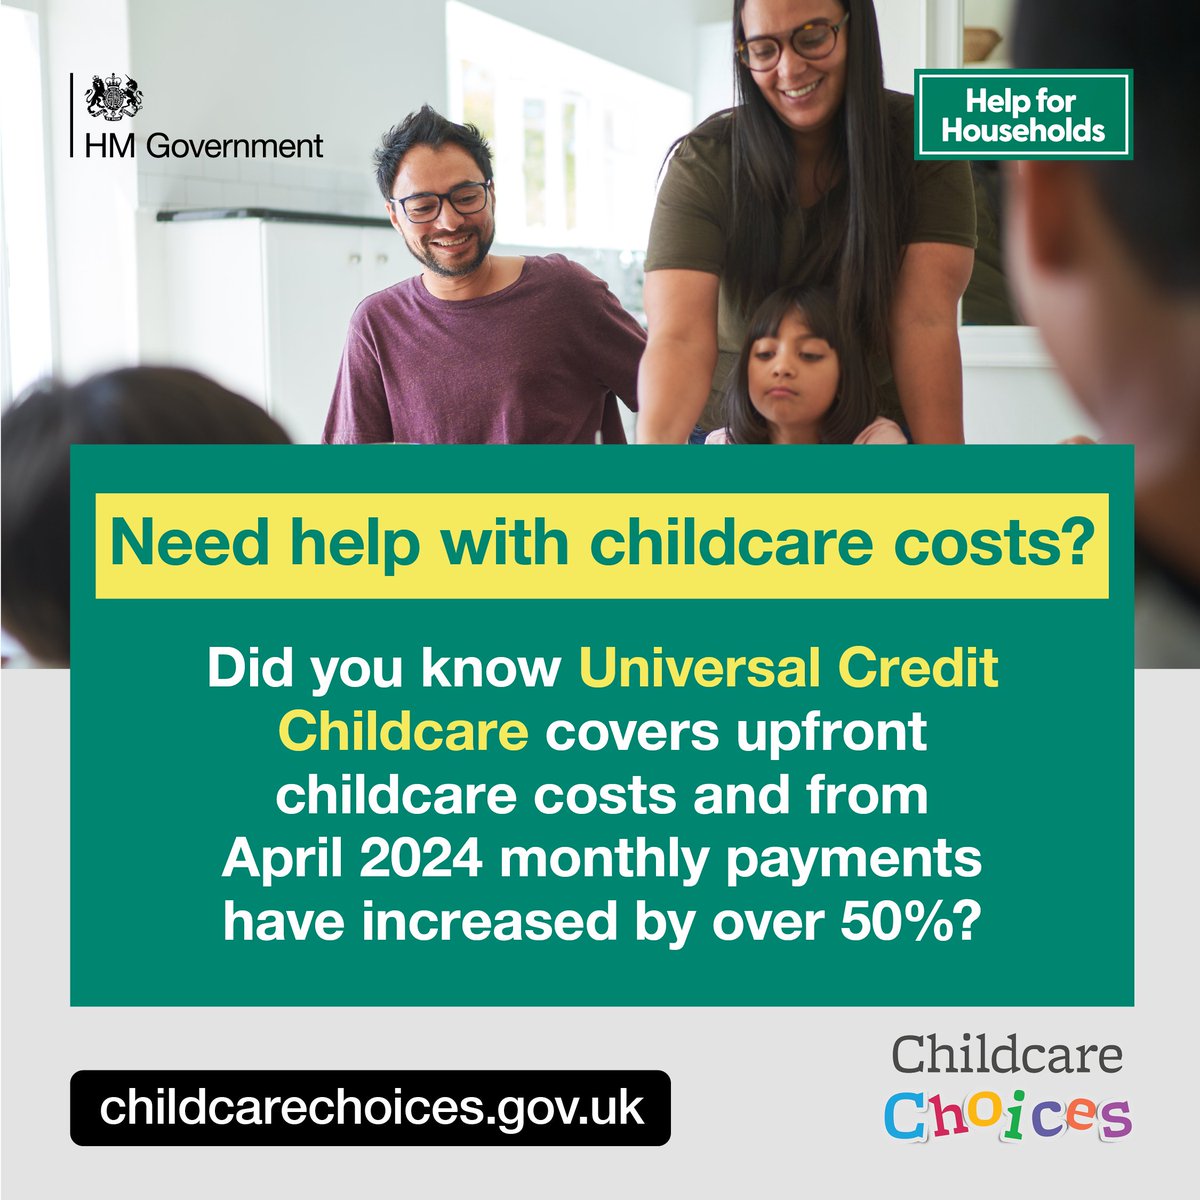 #UniversalCreditChildcare now offers even more support ow.ly/BpYB50Rk87F

#HelpForHouseholds'